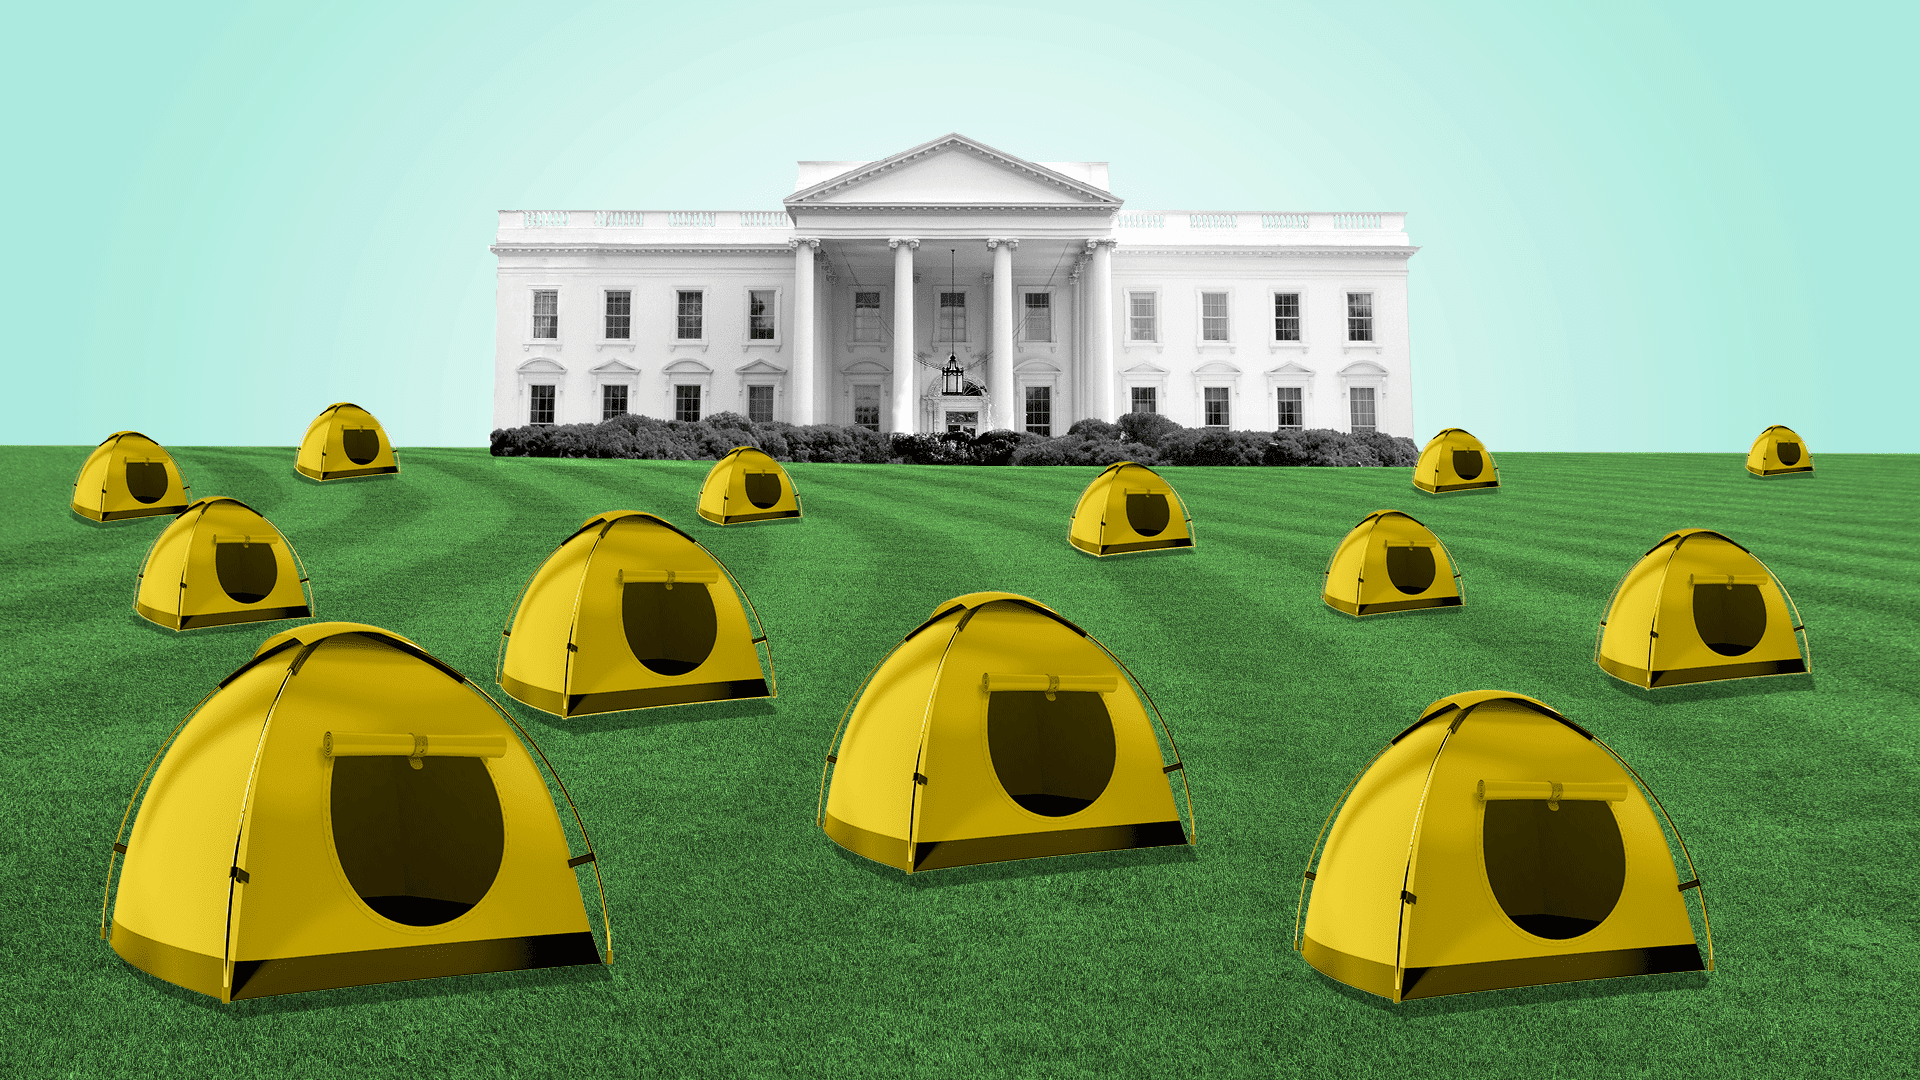 Illustration of White House with tents out front.